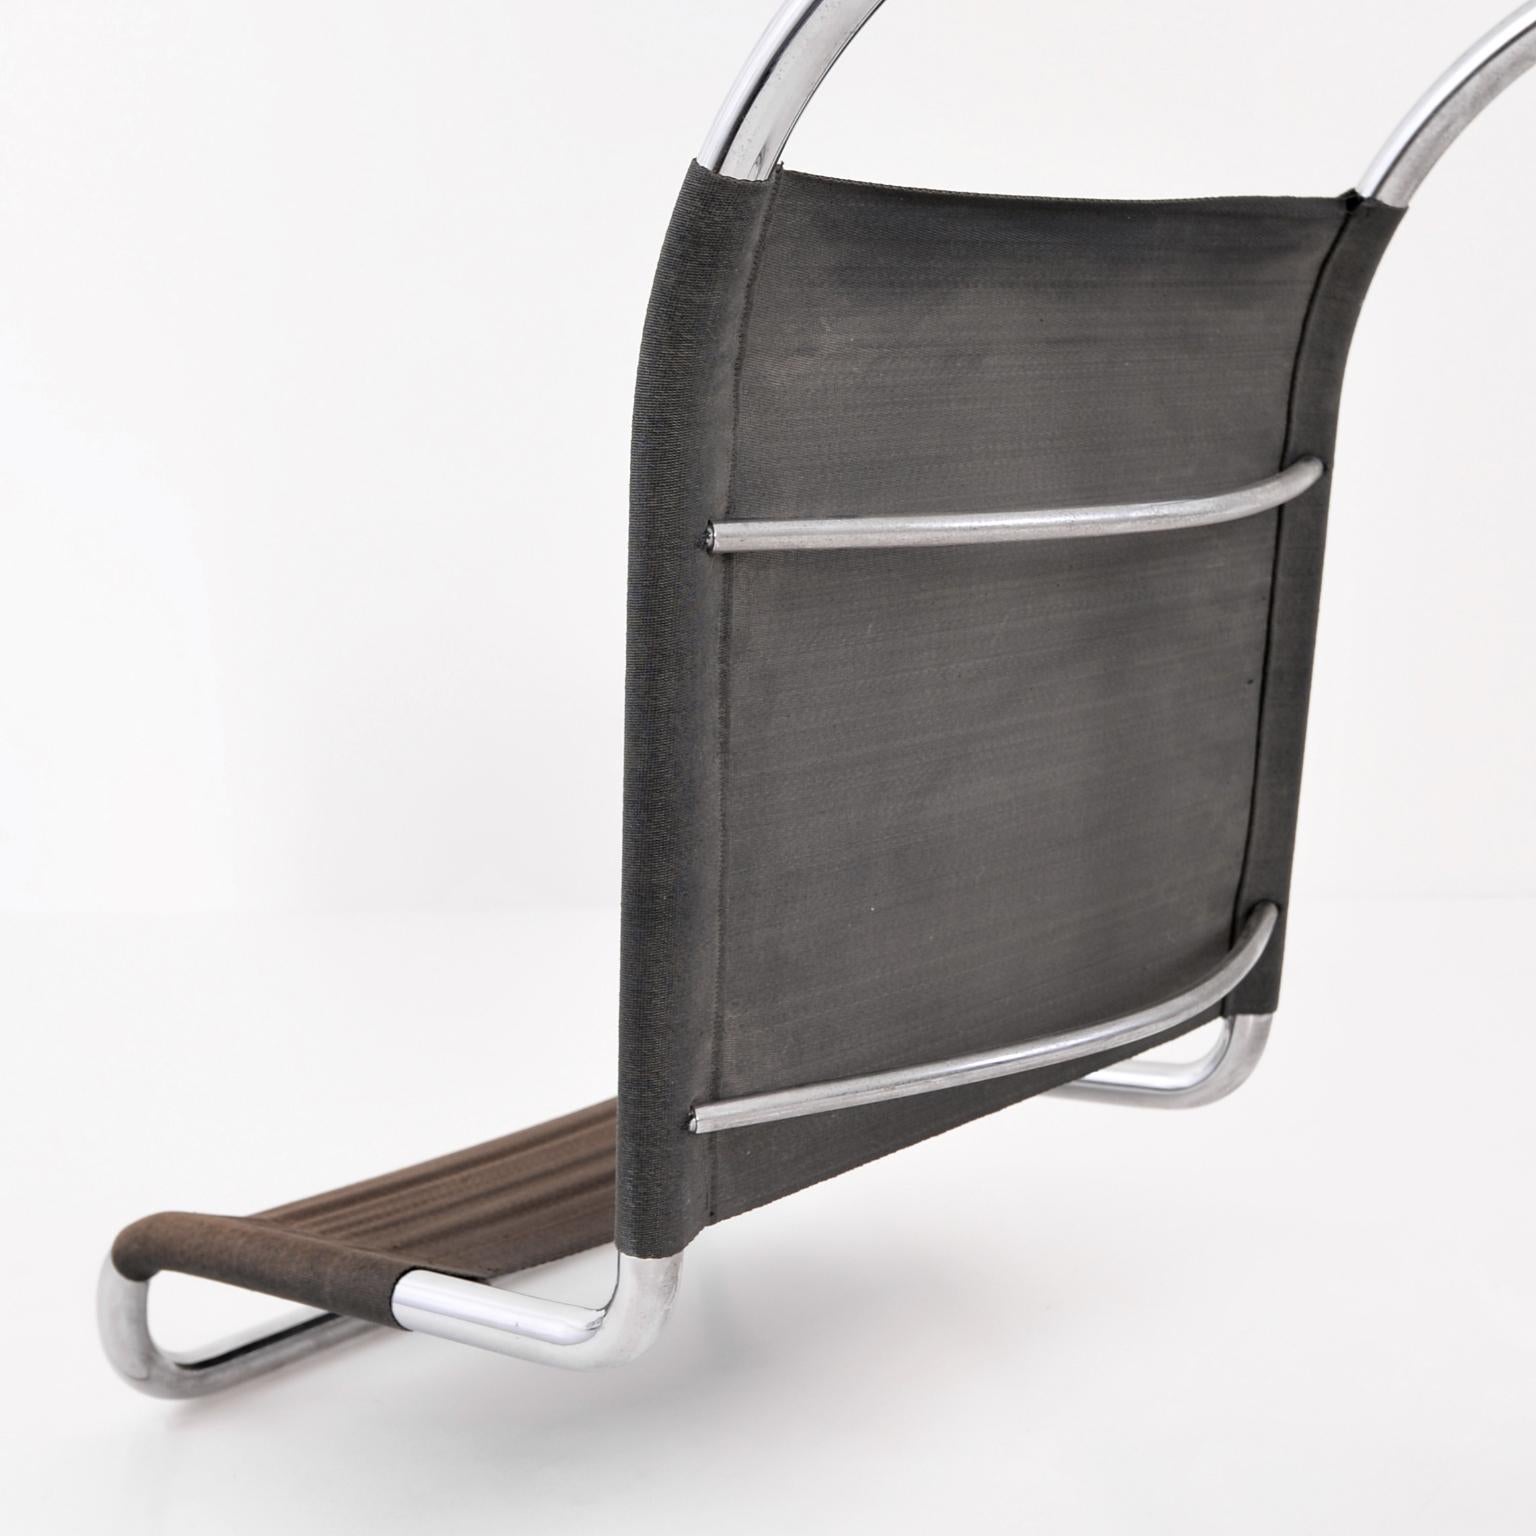 Steel Ludwig Mies van der Rohe Weißenhof Mr 10 / Mr 533 Chairs Manufactured by Thonet For Sale